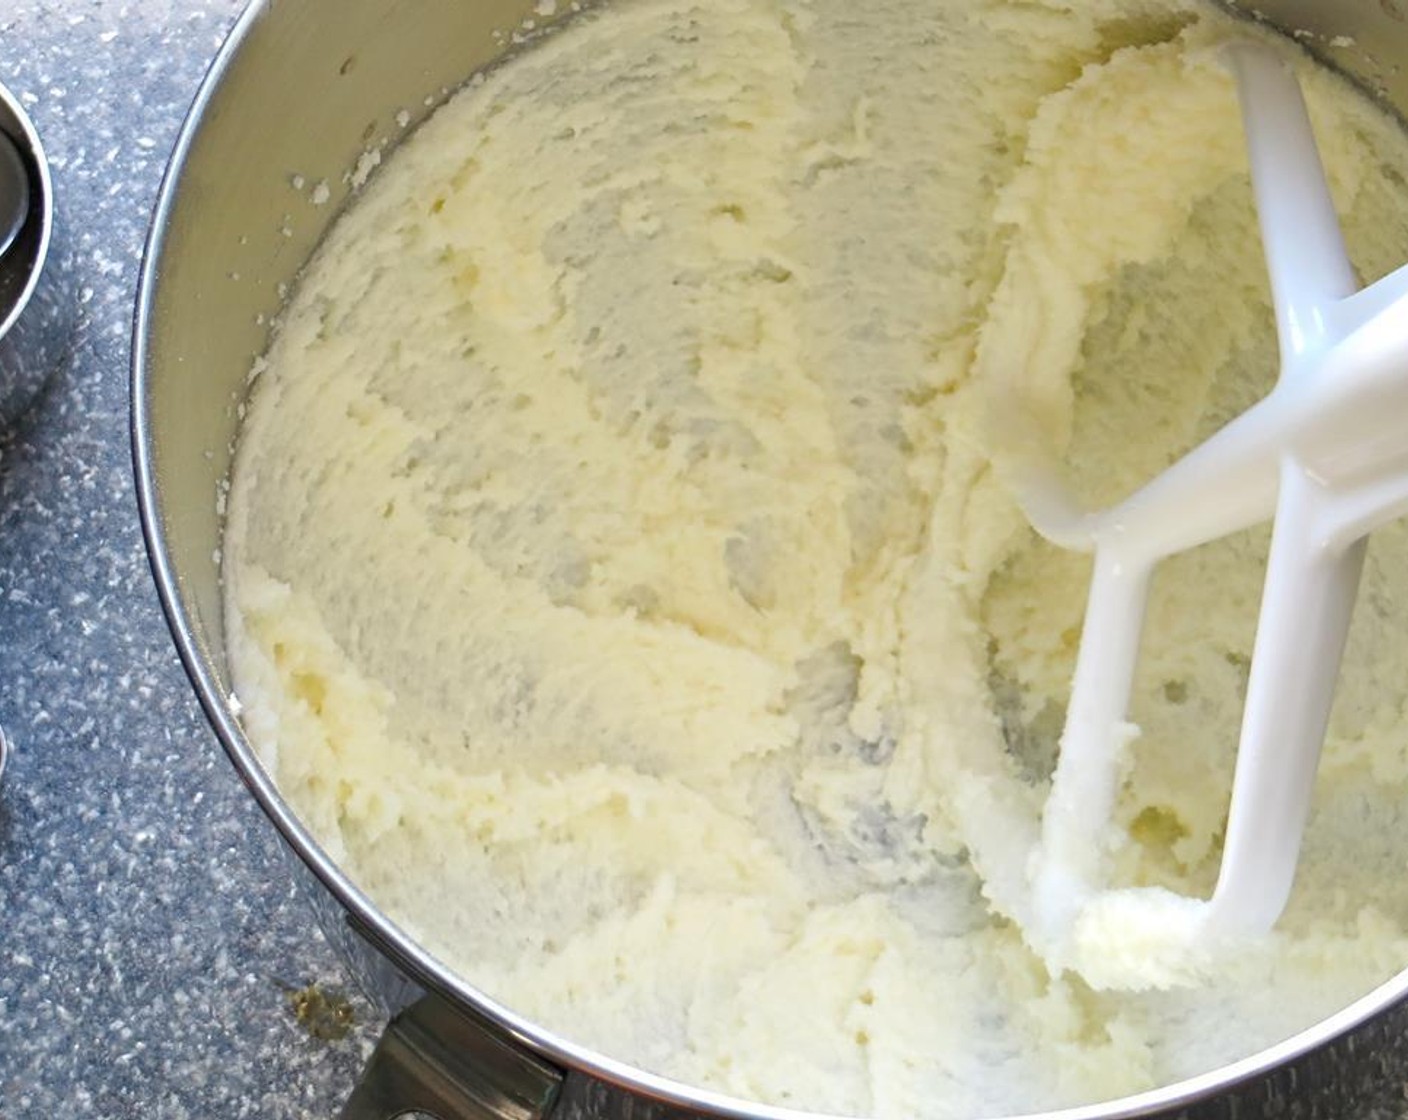 step 6 In a large bowl add the Unsalted Butter (1/2 cup) and Granulated Sugar (1 cup). Cream the butter and sugar together until light and fluffy, about 4-6 minutes, scraping the sides of a bowl with a rubber spatula occasionally.